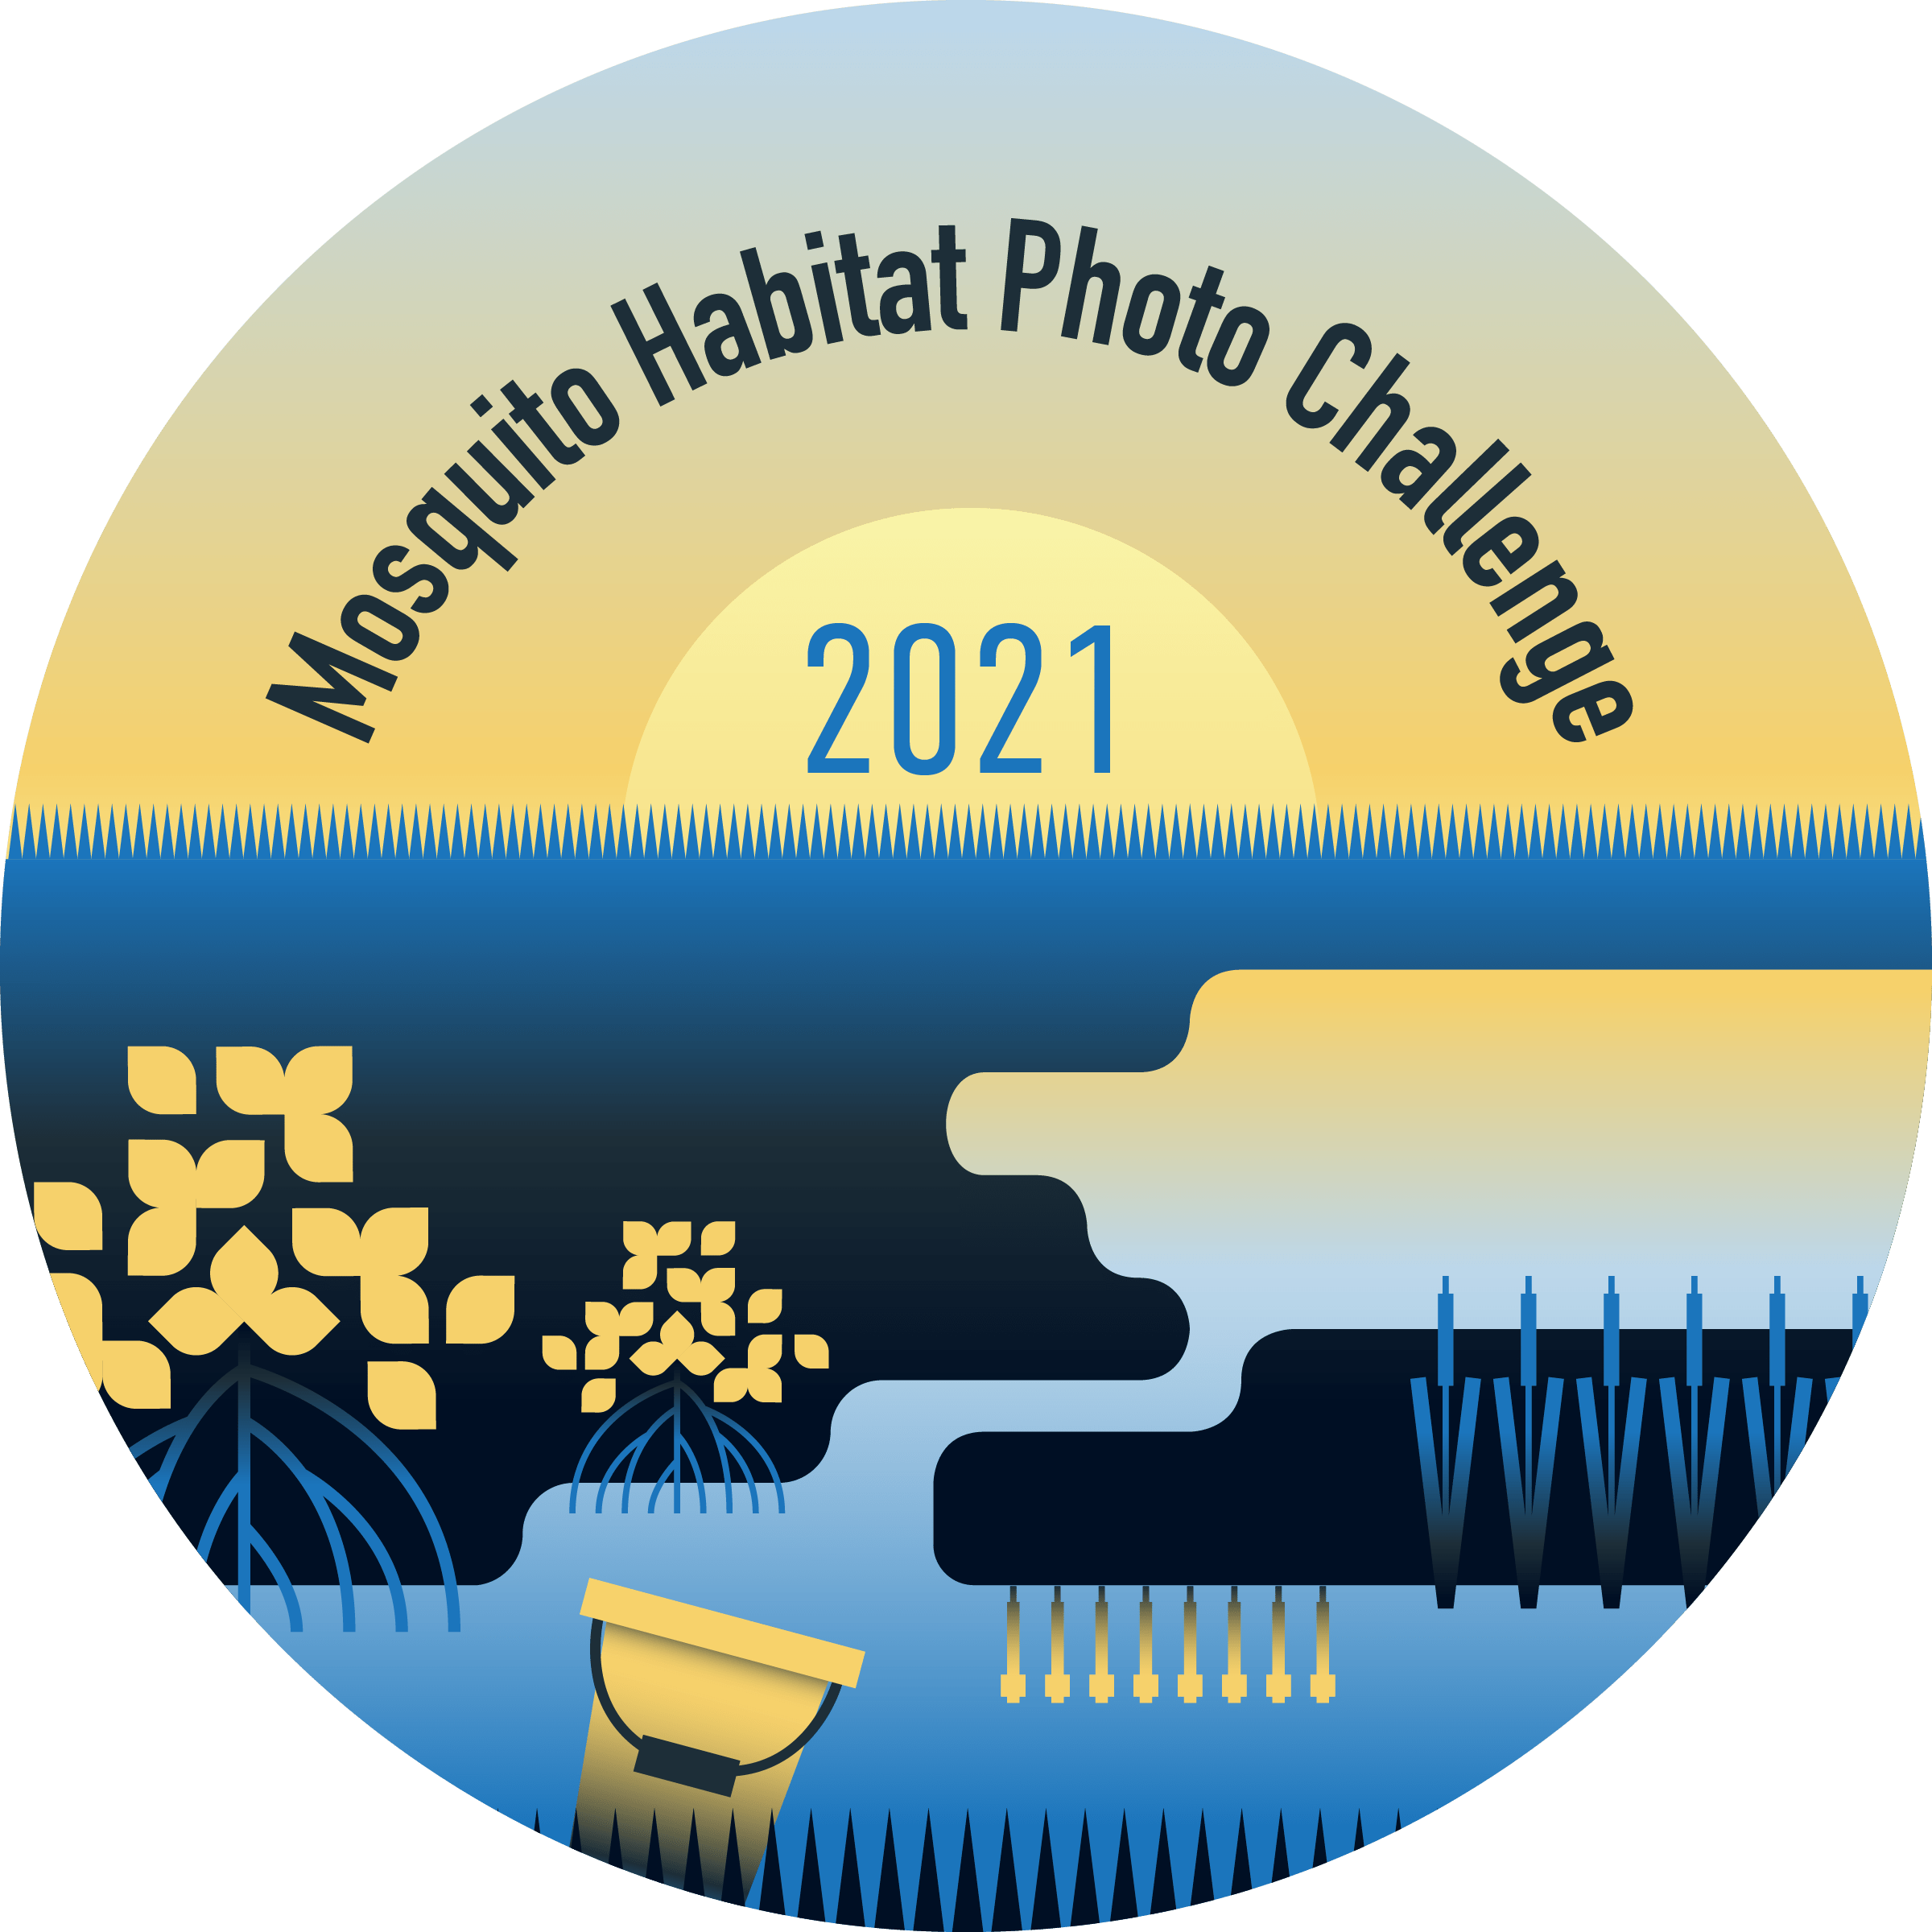 A badge showing a graphical representation of mosquito habitats on a landscape with the words Mosquito Habitat Photo Challenge 2021.